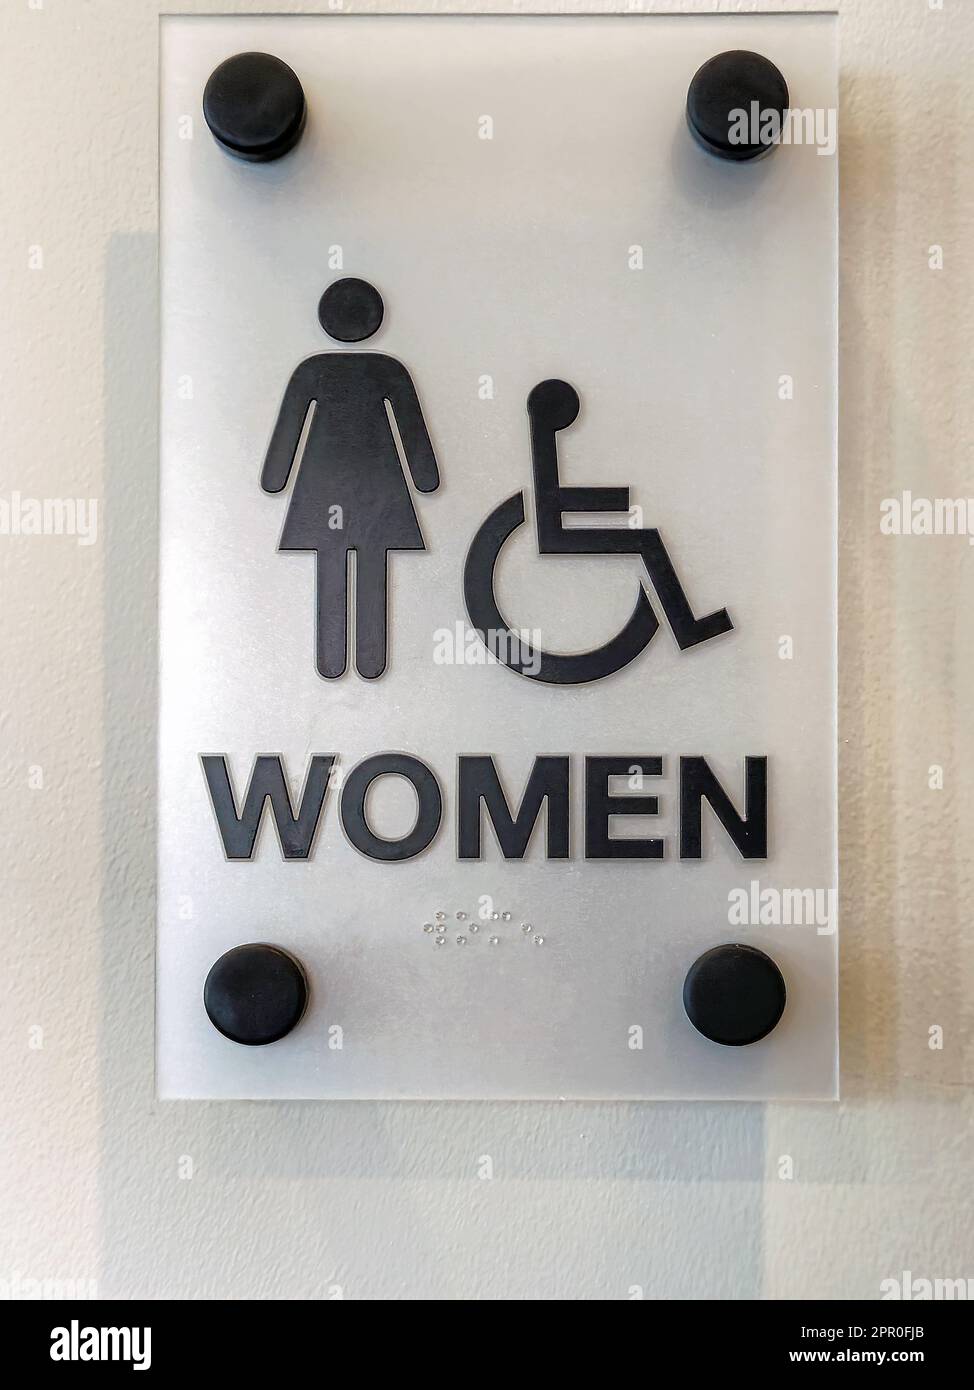 Close-up of a glass women's restroom sign with Braille feature Stock Photo